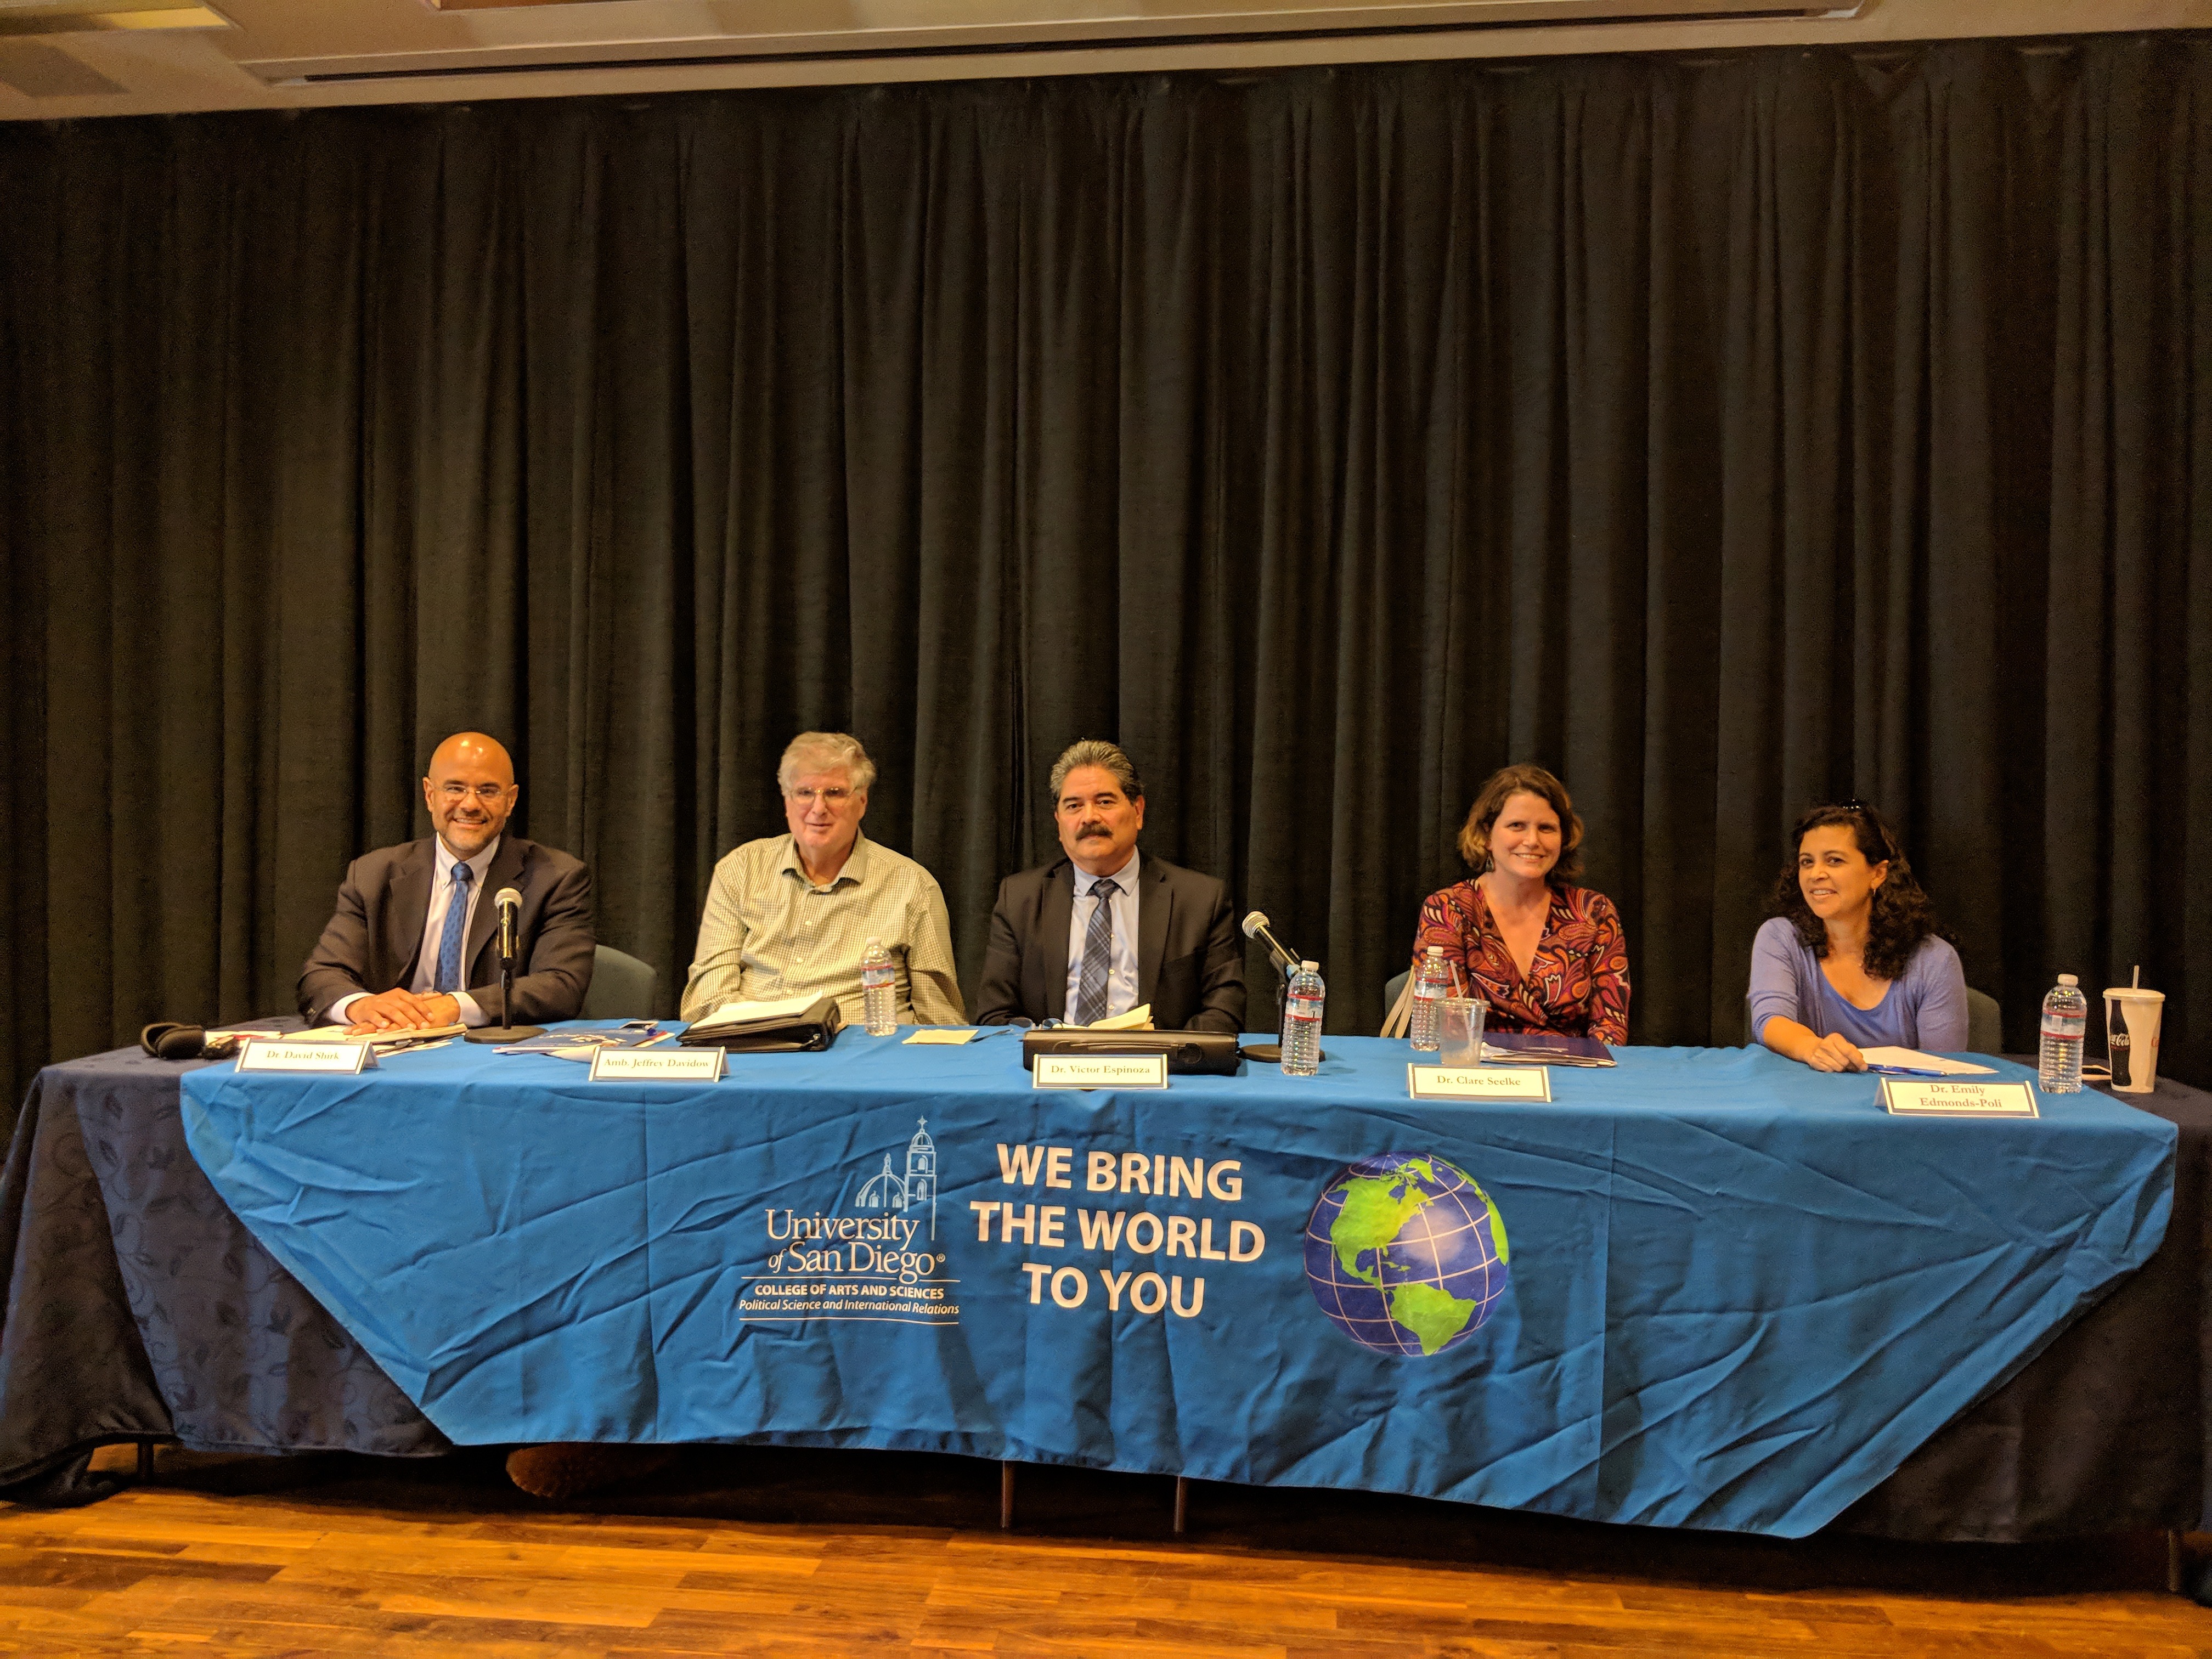 From left to right, moderator Dr. David A. Shirk and panelists, Amb. Jeffrey Davidow, Dr. Victor Espinoza, Dr. Clare Seelke, and Dr. Emily Edmonds-Poli.